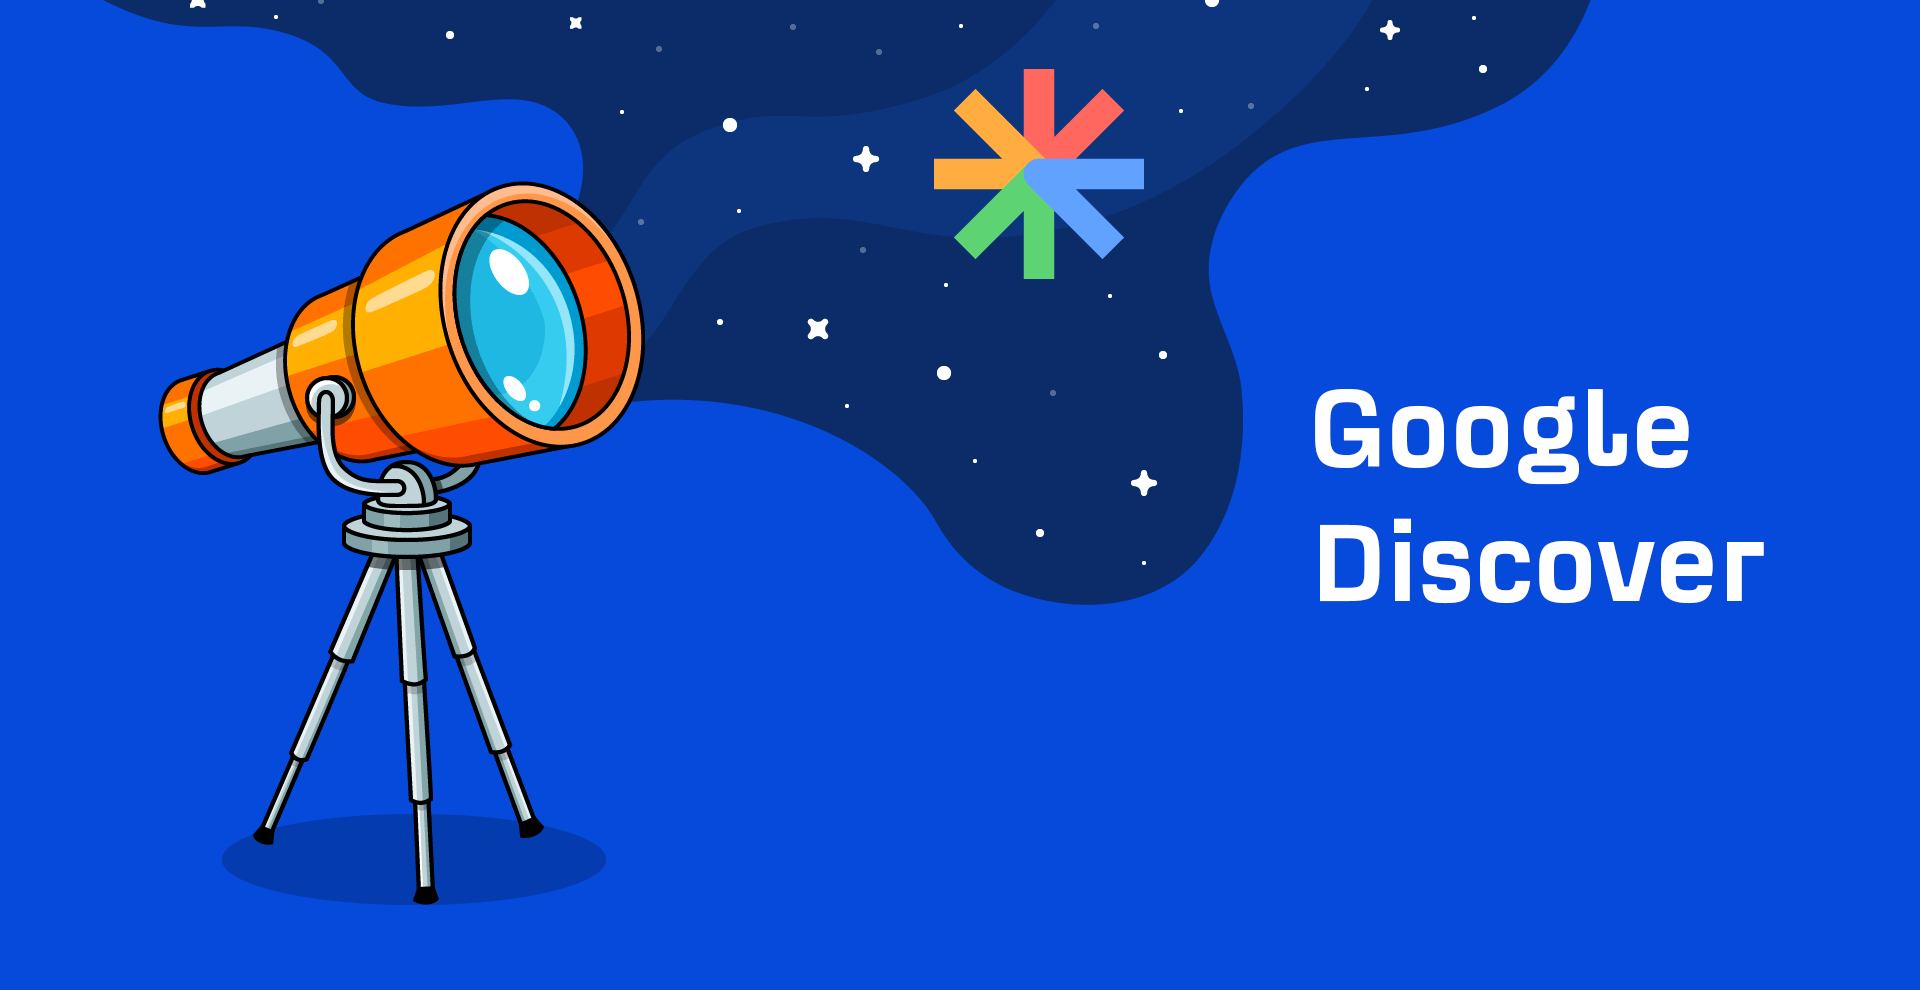 Google Discover and SEO